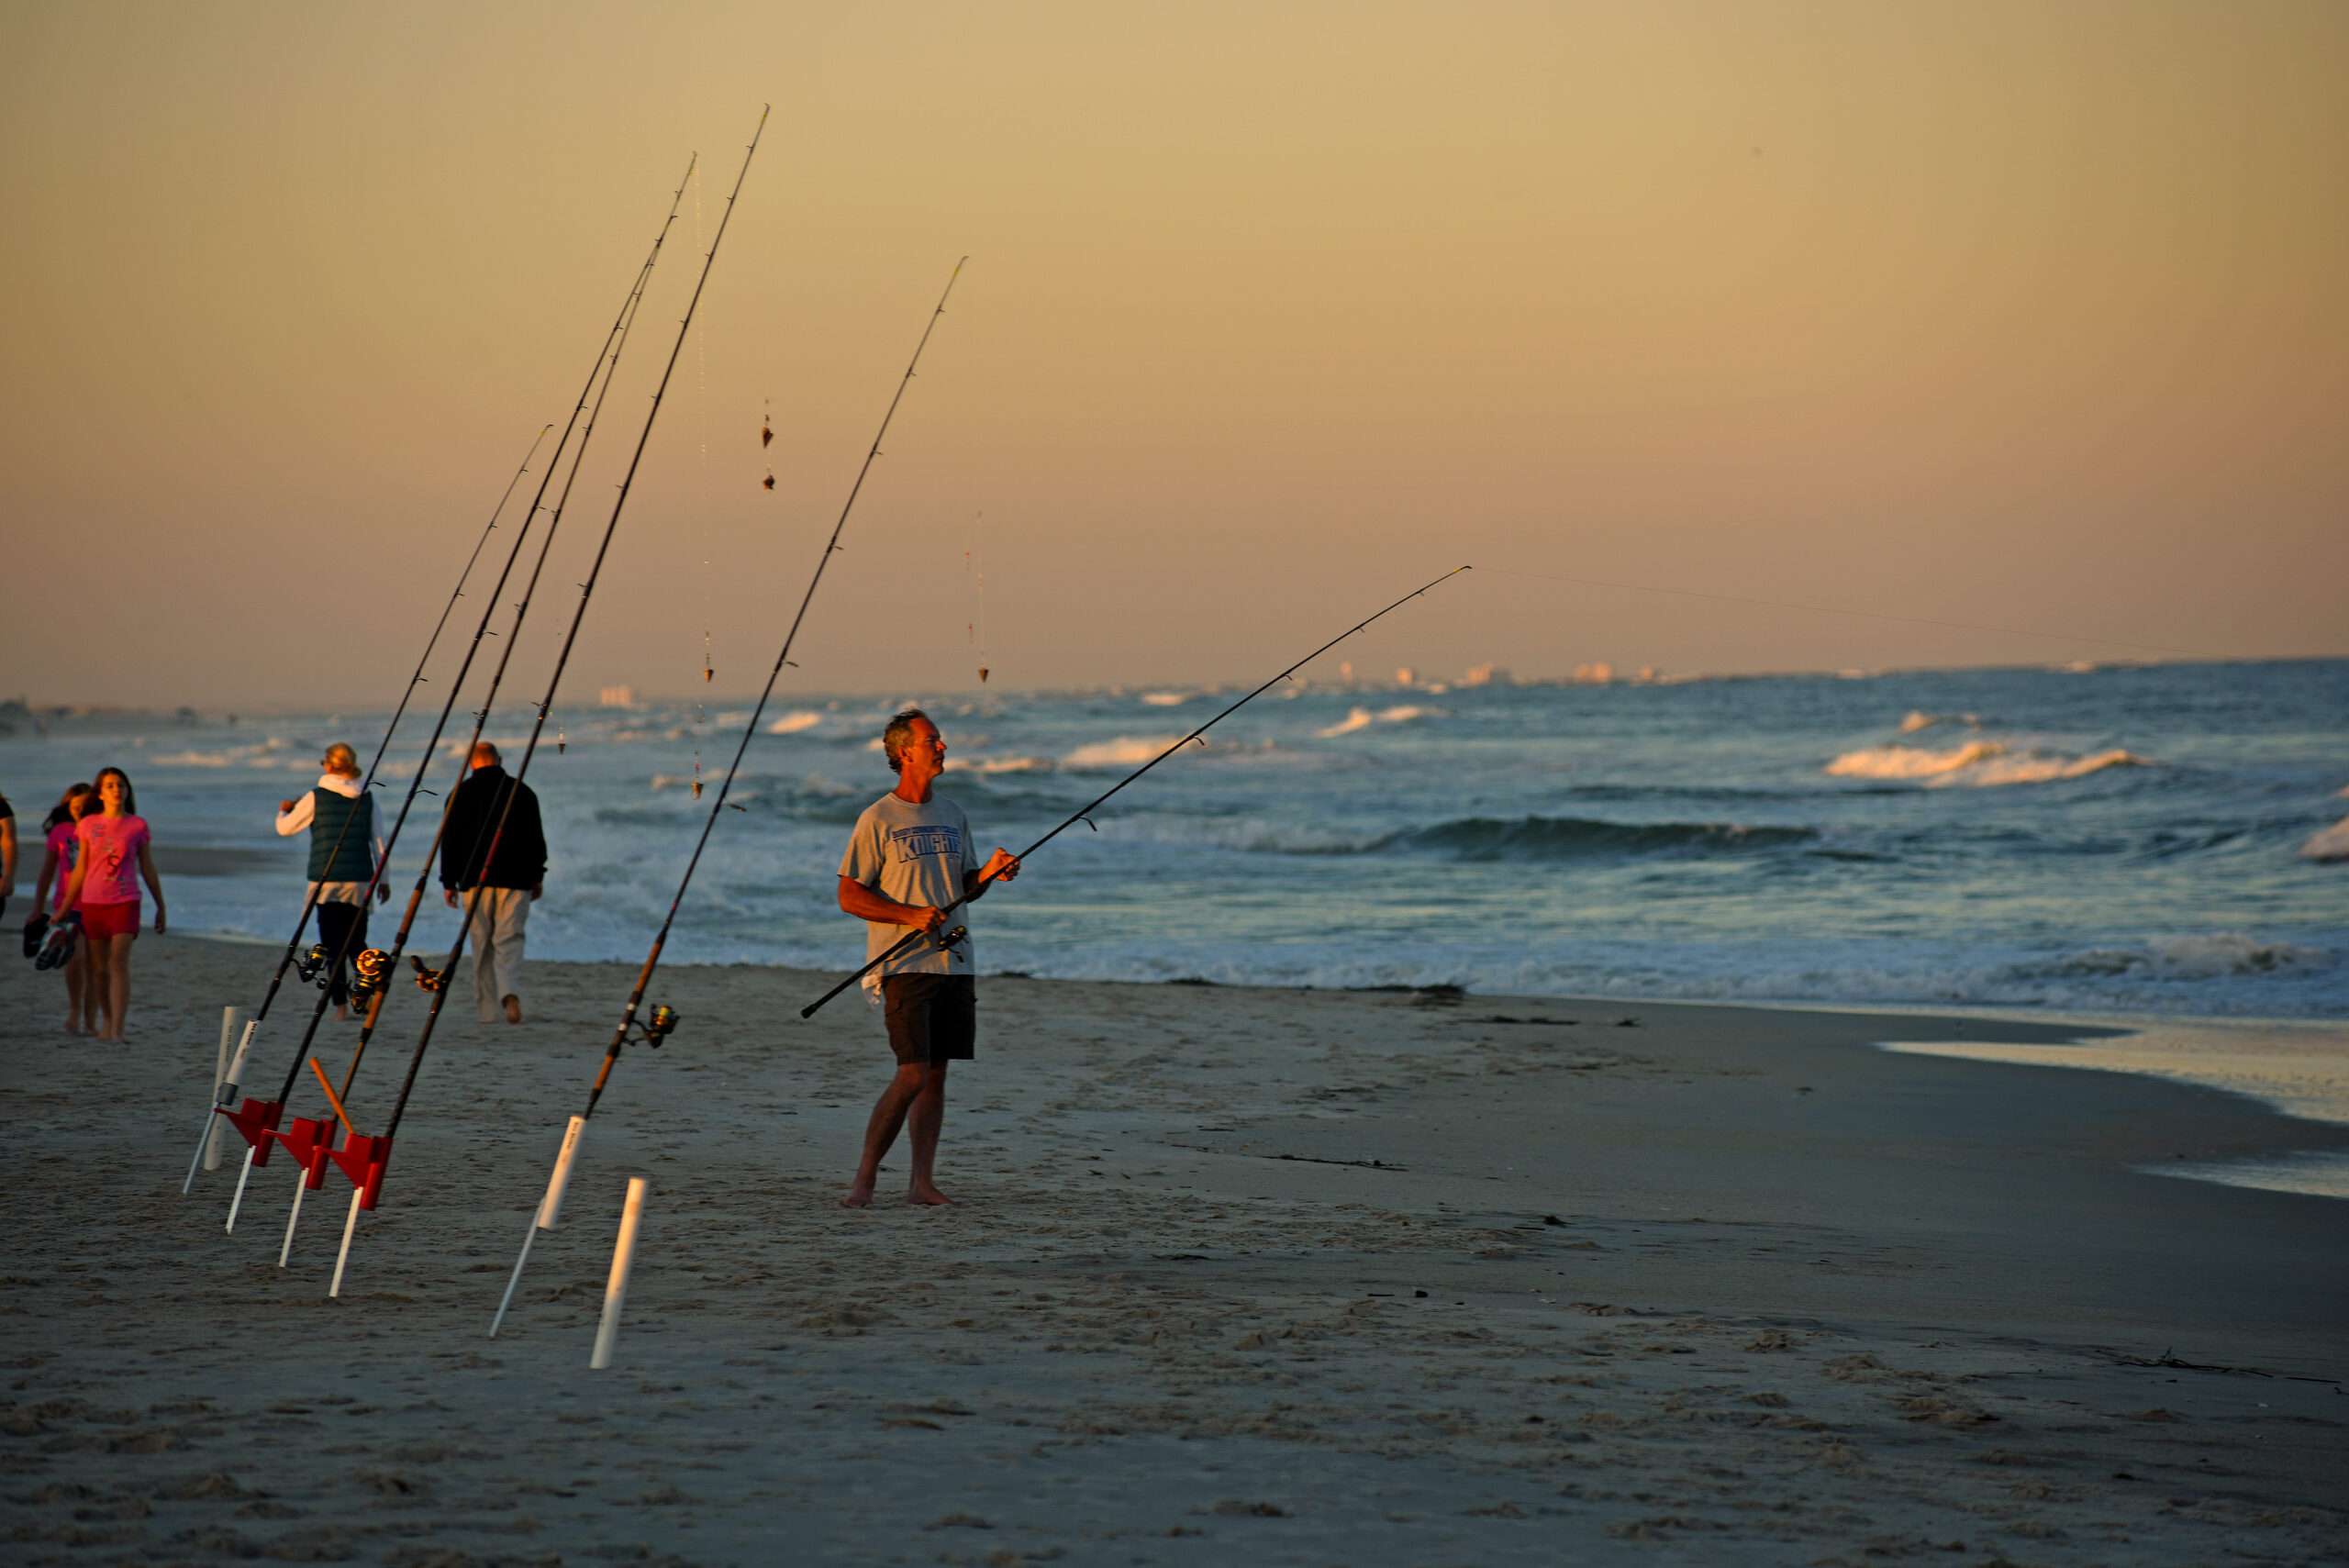 image: a man fishes from the beach.